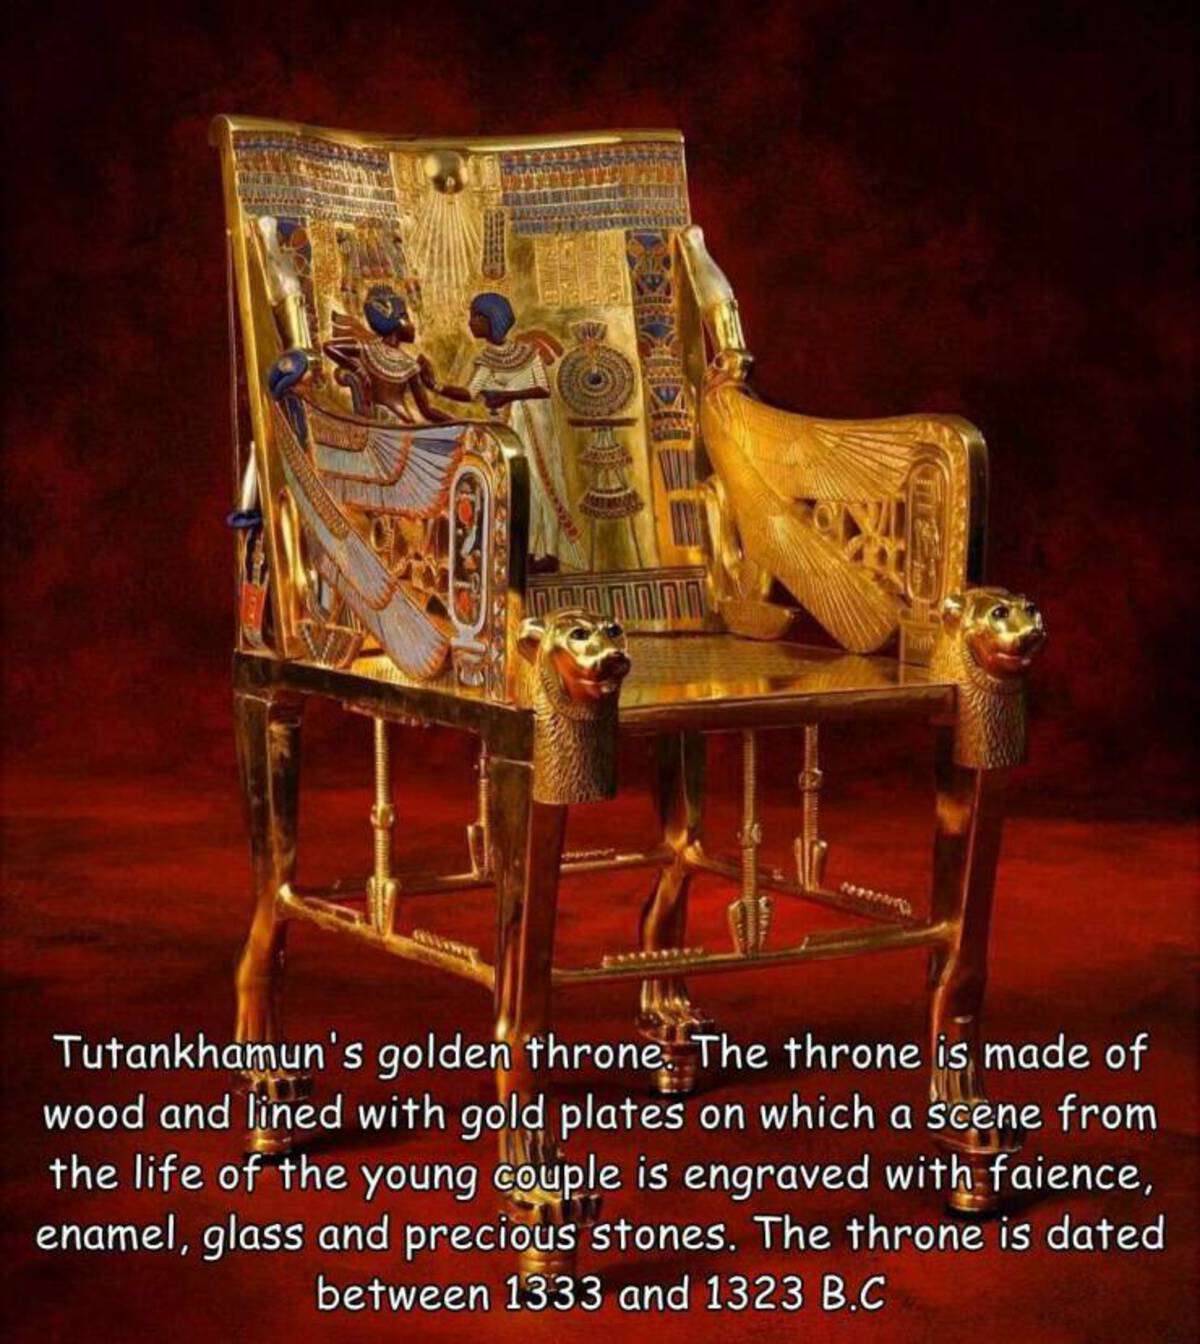 Fulaninar Dual Tutankhamun's golden throne. The throne is made of wood and lined with gold plates on which a scene from the life of the young couple is engraved with faience, enamel, glass and precious stones. The throne is dated between 1333 and 1323 B.C